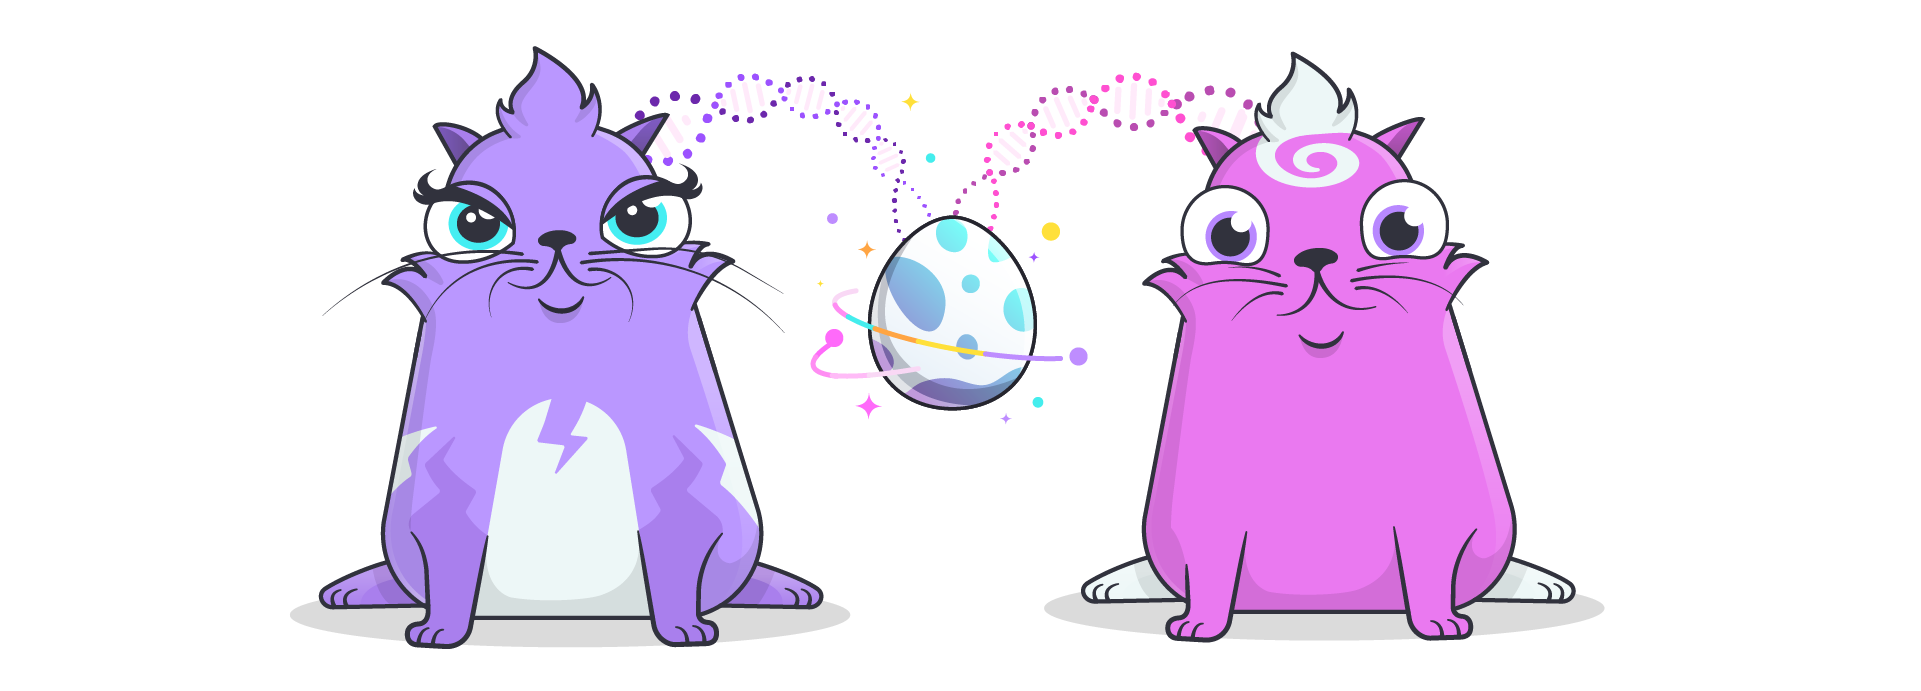 crypto kitty genome project